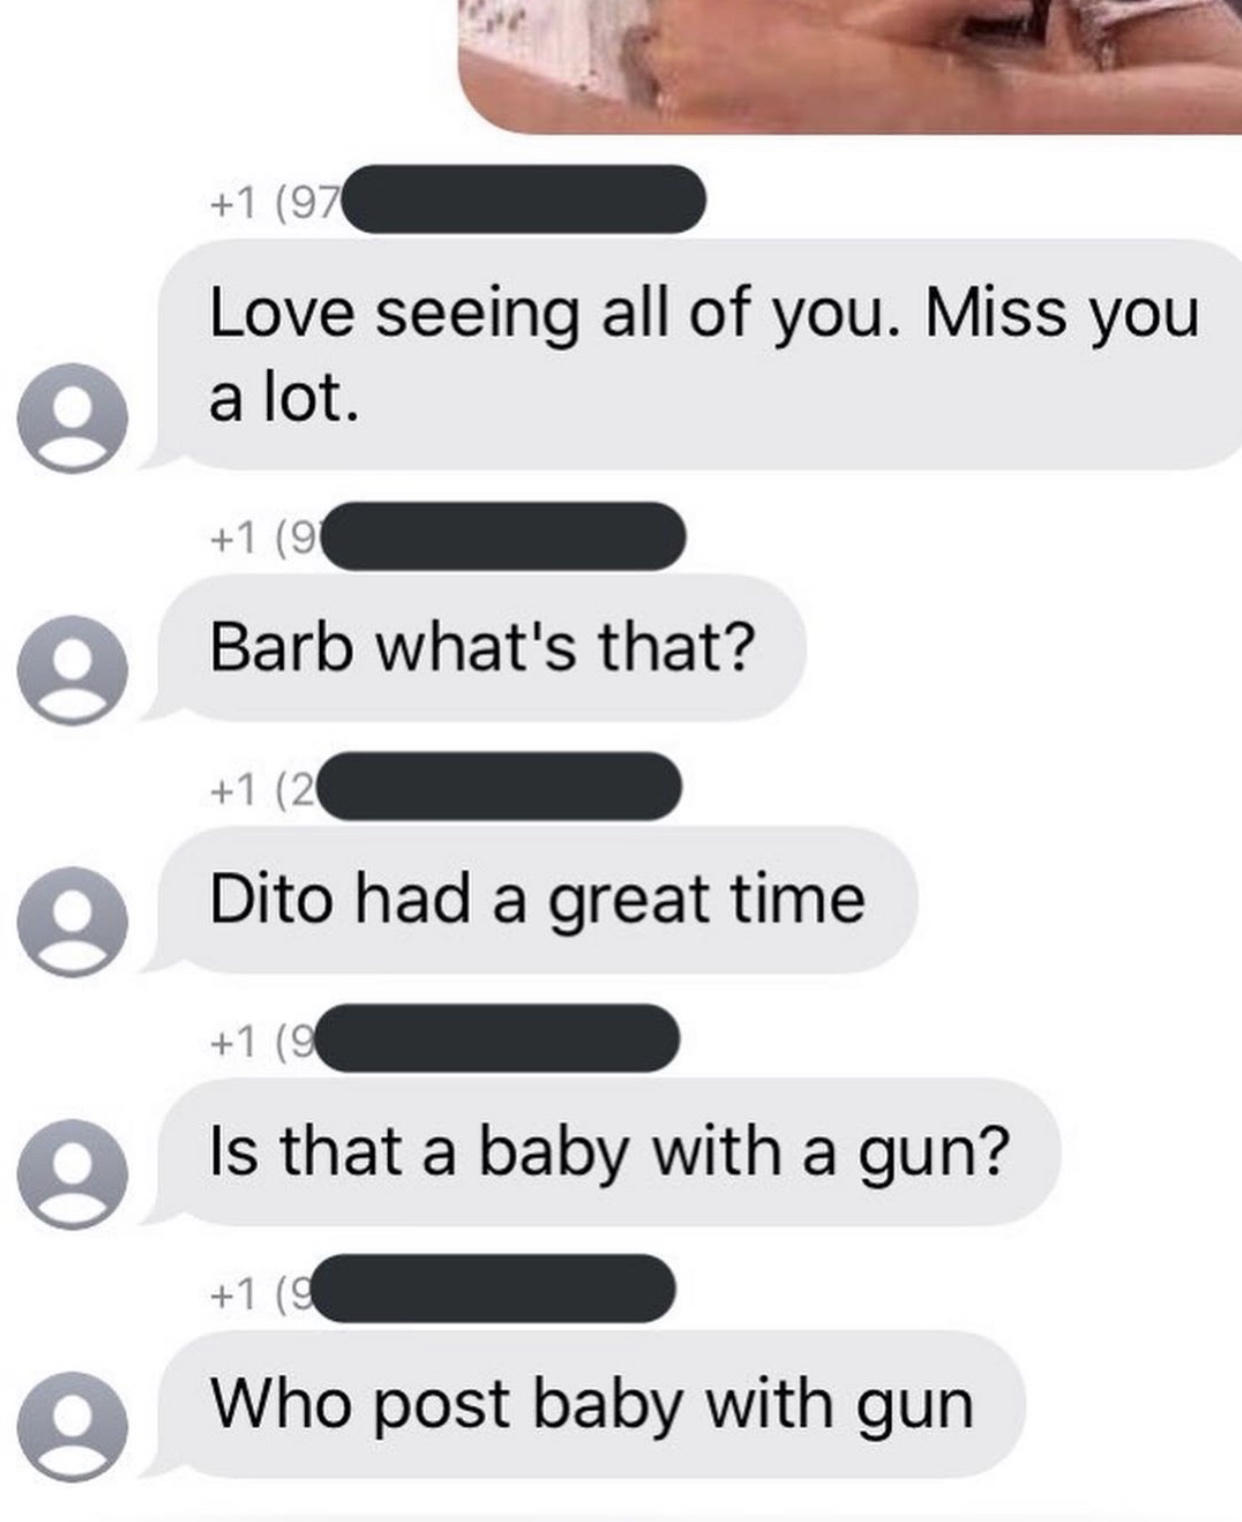 communication - 1 97 Love seeing all of you. Miss you a lot. 1 91 Barb what's that? 1 2 Dito had a great time 1 9 Is that a baby with a gun? 1 9 Who post baby with gun